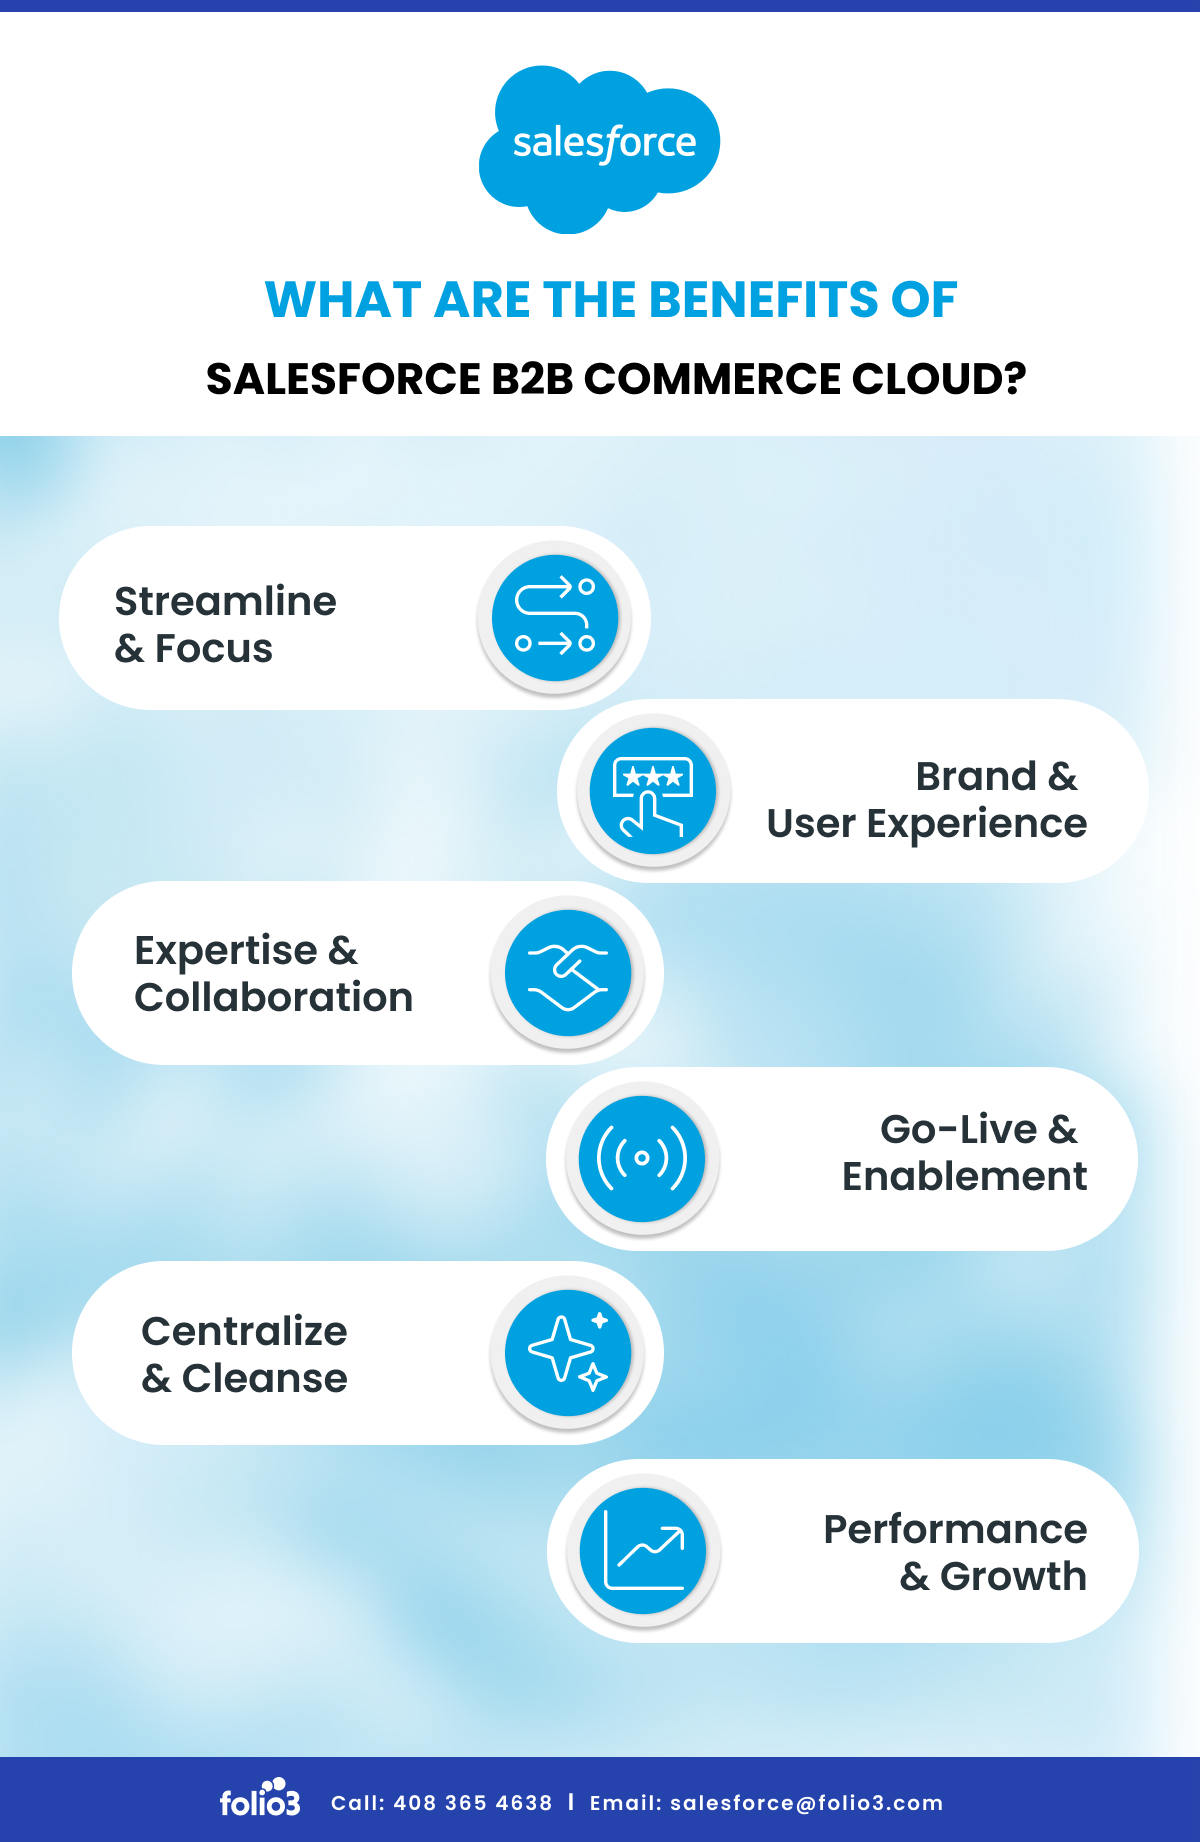 What Are the Benefits of Salesforce B2B Commerce Cloud?